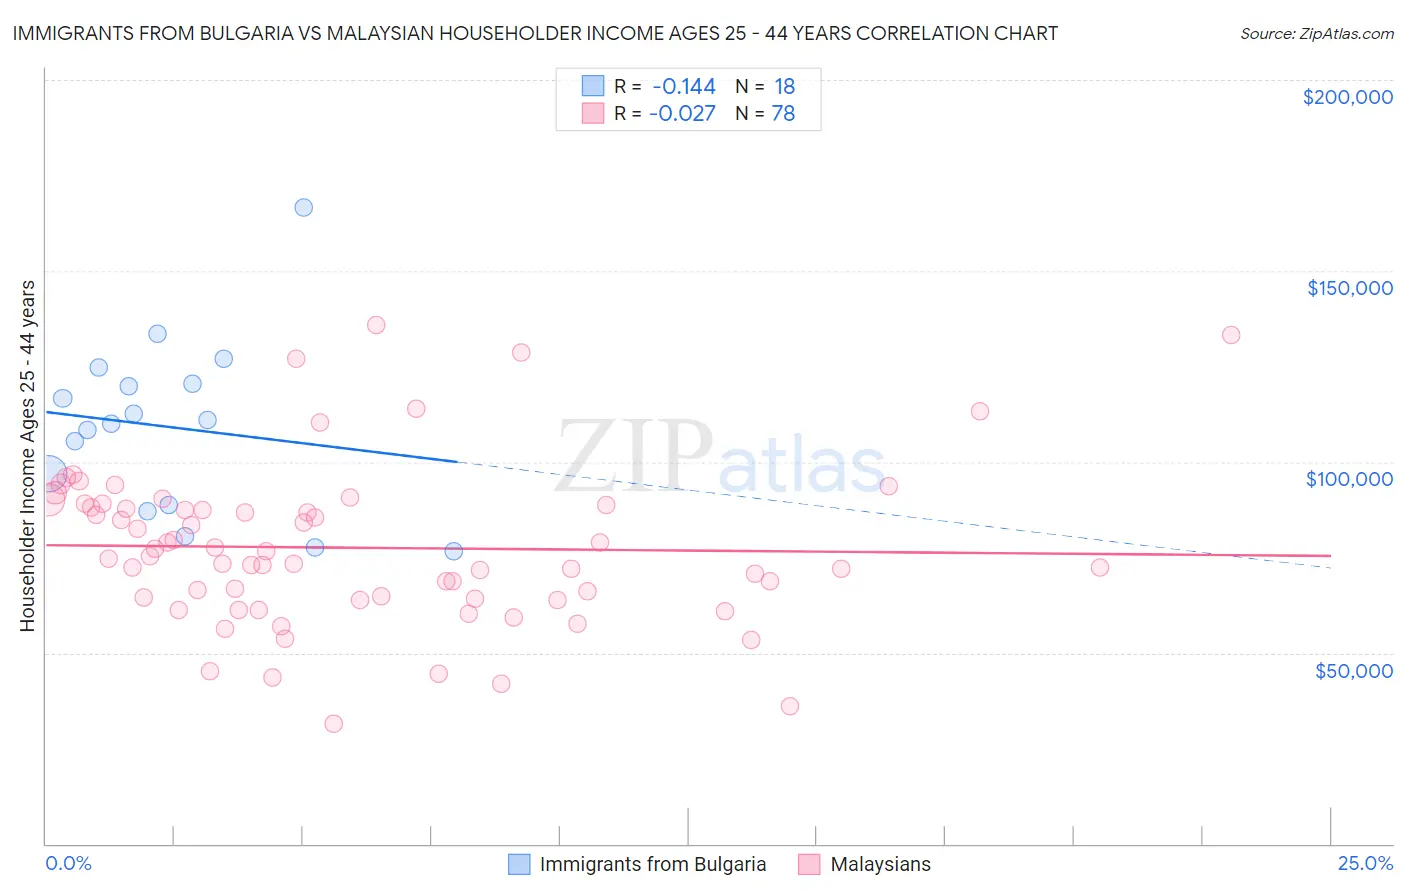 Immigrants from Bulgaria vs Malaysian Householder Income Ages 25 - 44 years